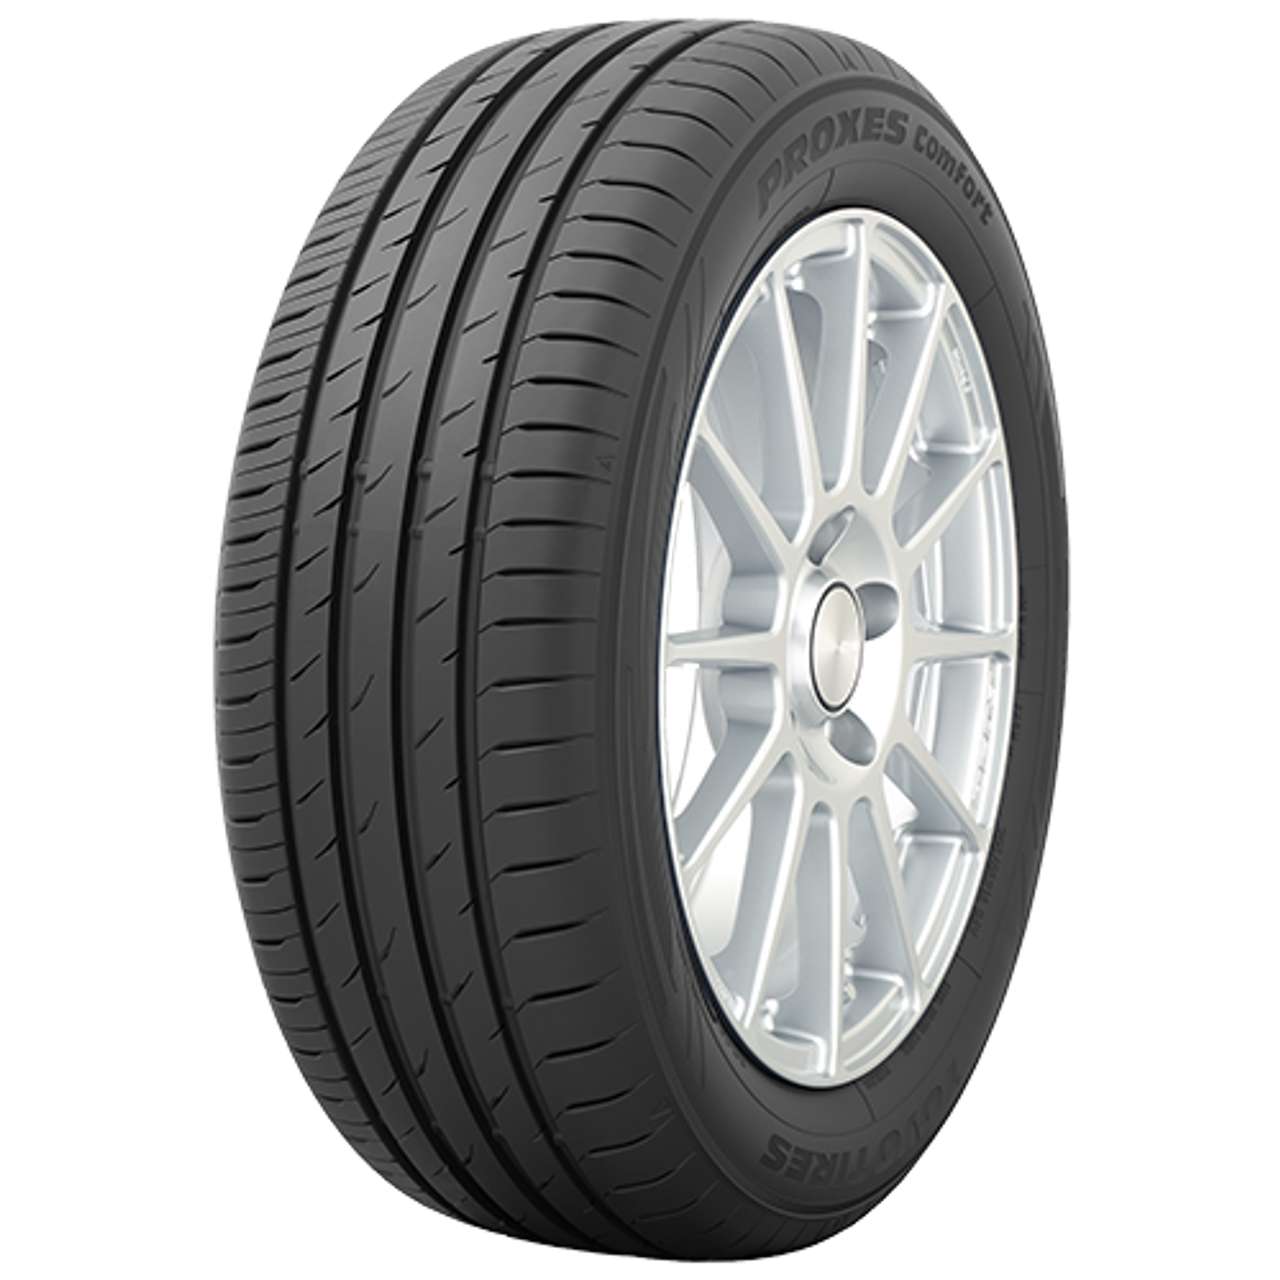 TOYO PROXES COMFORT 195/65R15 91V BSW